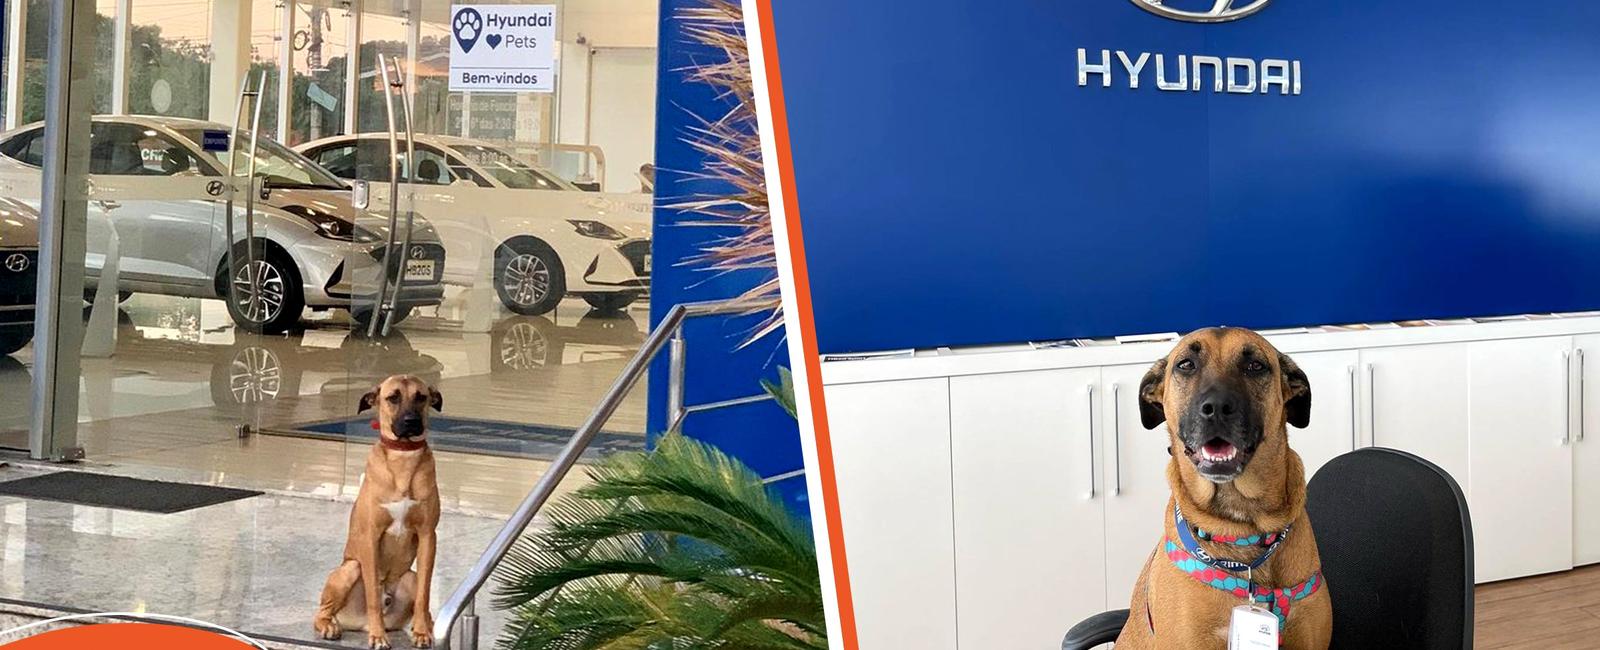 Hyundai showroom in brazil hires a stray dog as a sales consultant